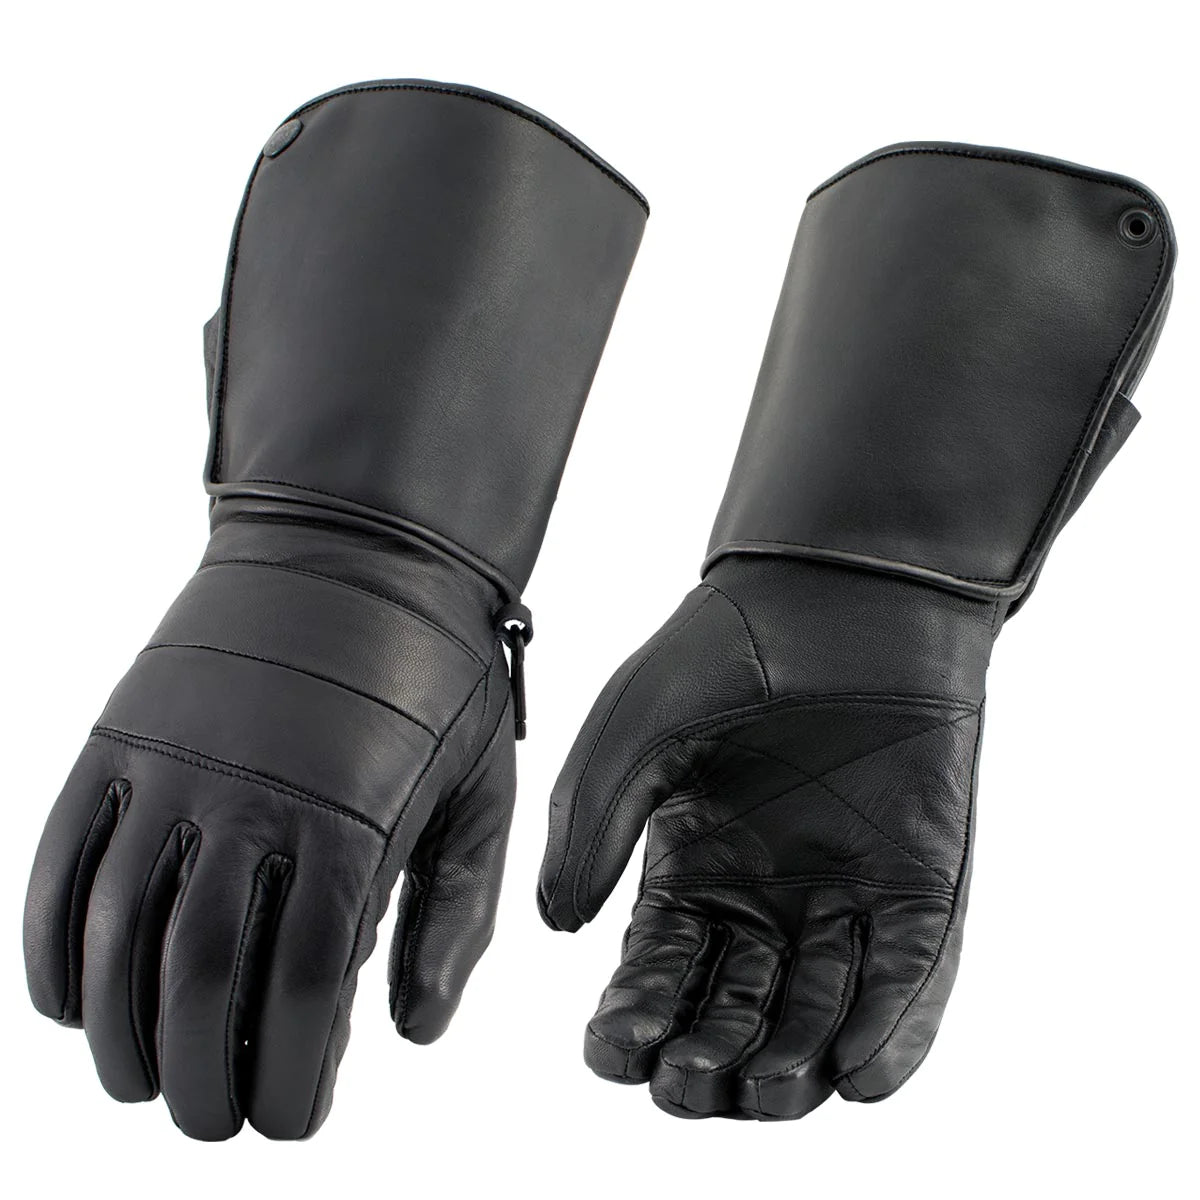 Men's Black Leather ‘Long Cuff’ Gauntlet Gloves with Zipper Closure